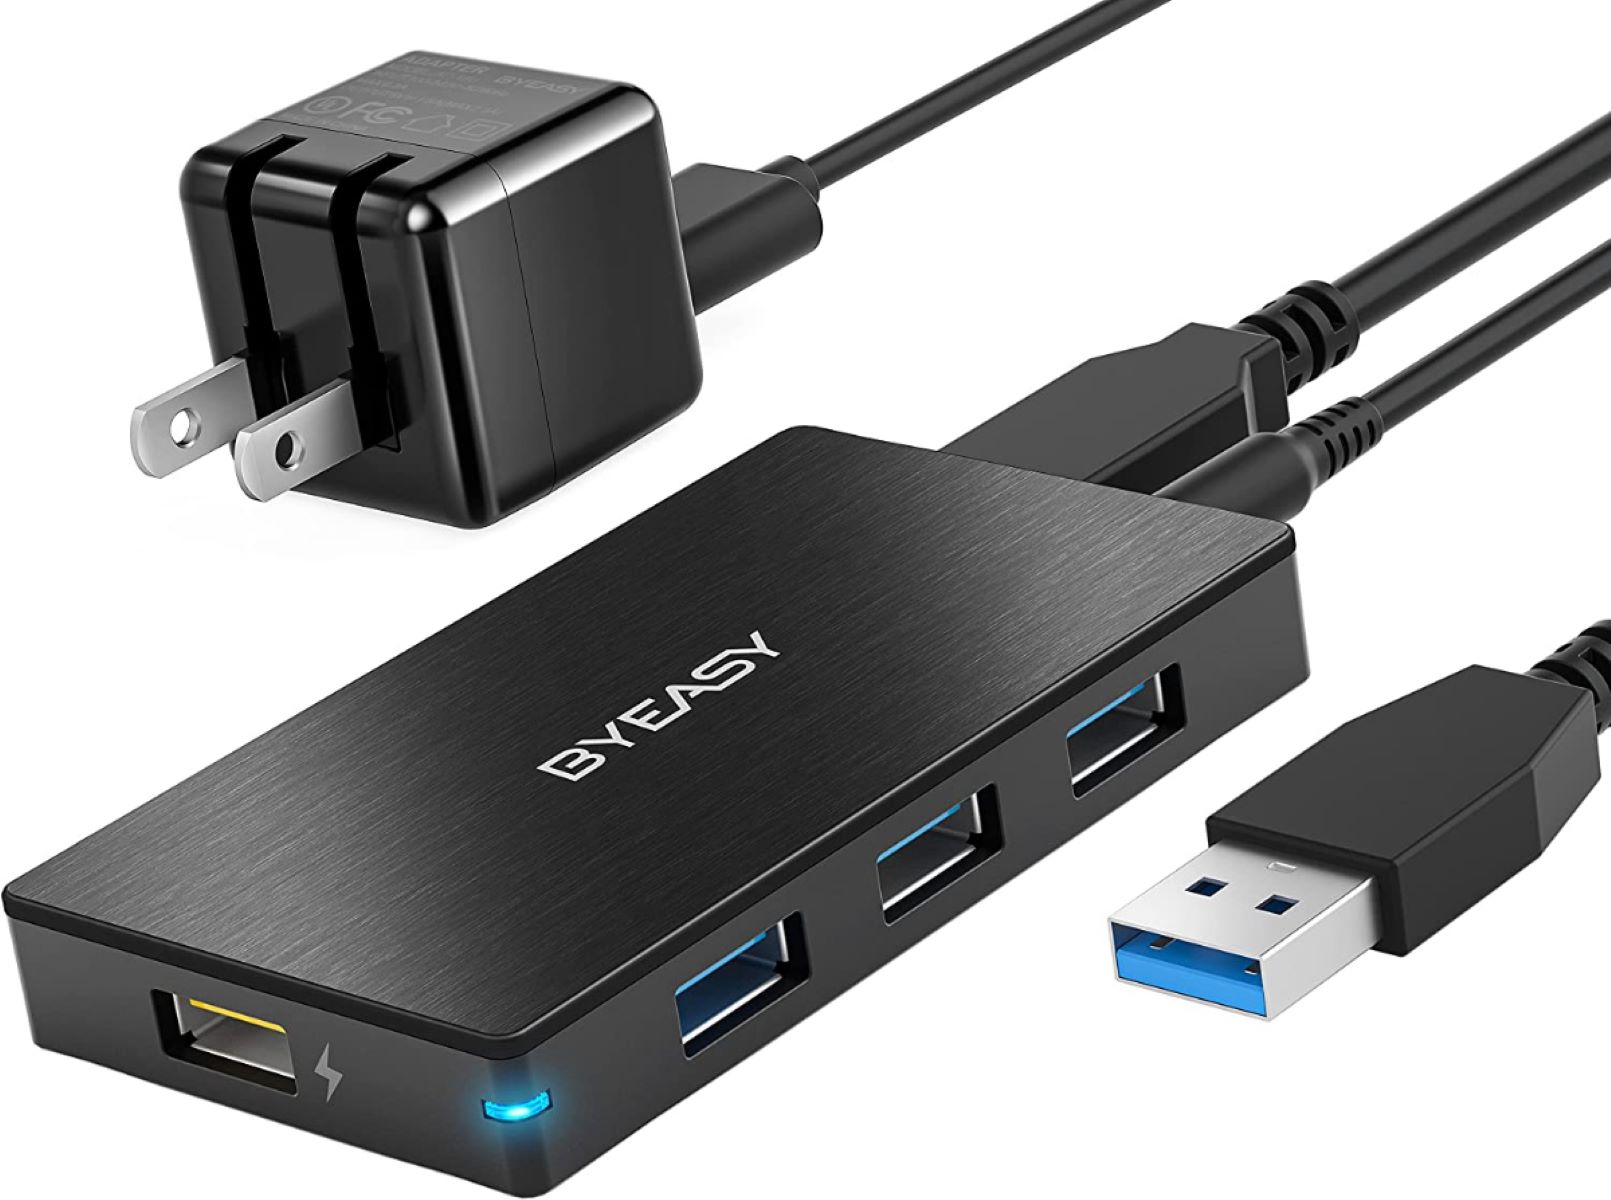 What Is A Powered USB Hub